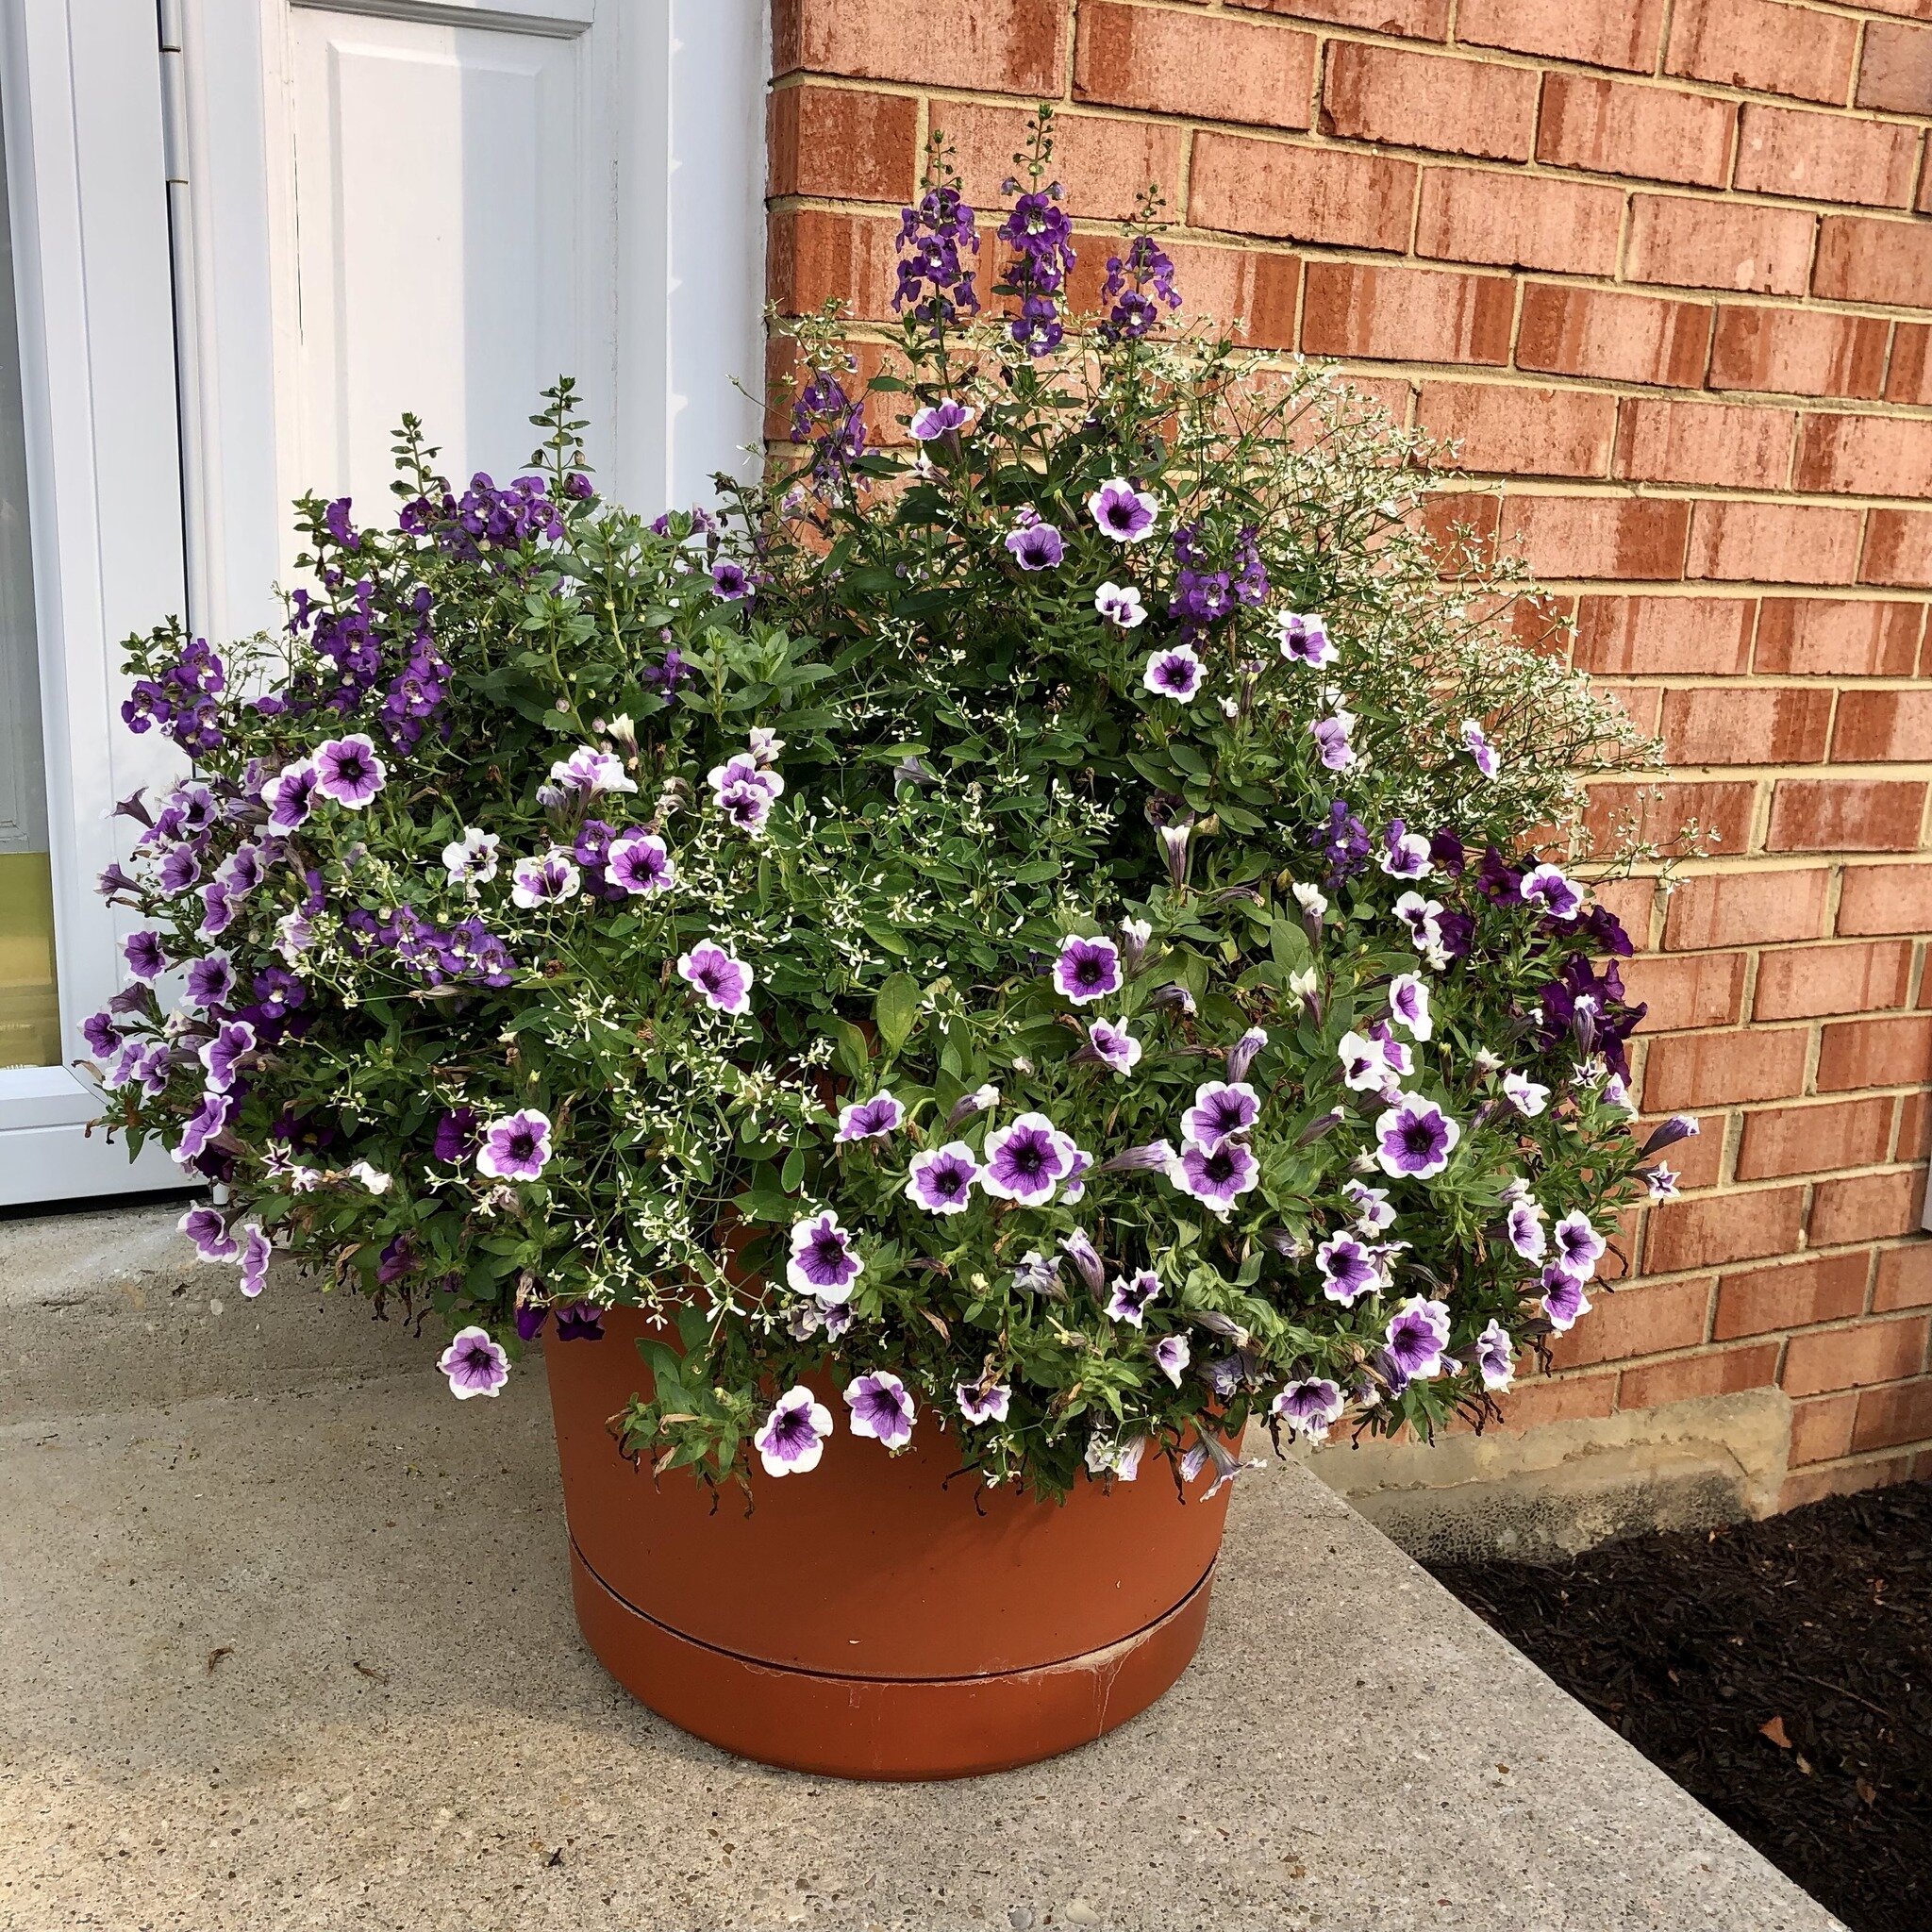 Gorgeous Purple and White Explosion! #DIY with two types of #petunia: one deep purple and the other purple with a white edge. These are planted around the edge of the pot and will be your spiller. In the center, use Diamond Frost euphorbia, a delicat